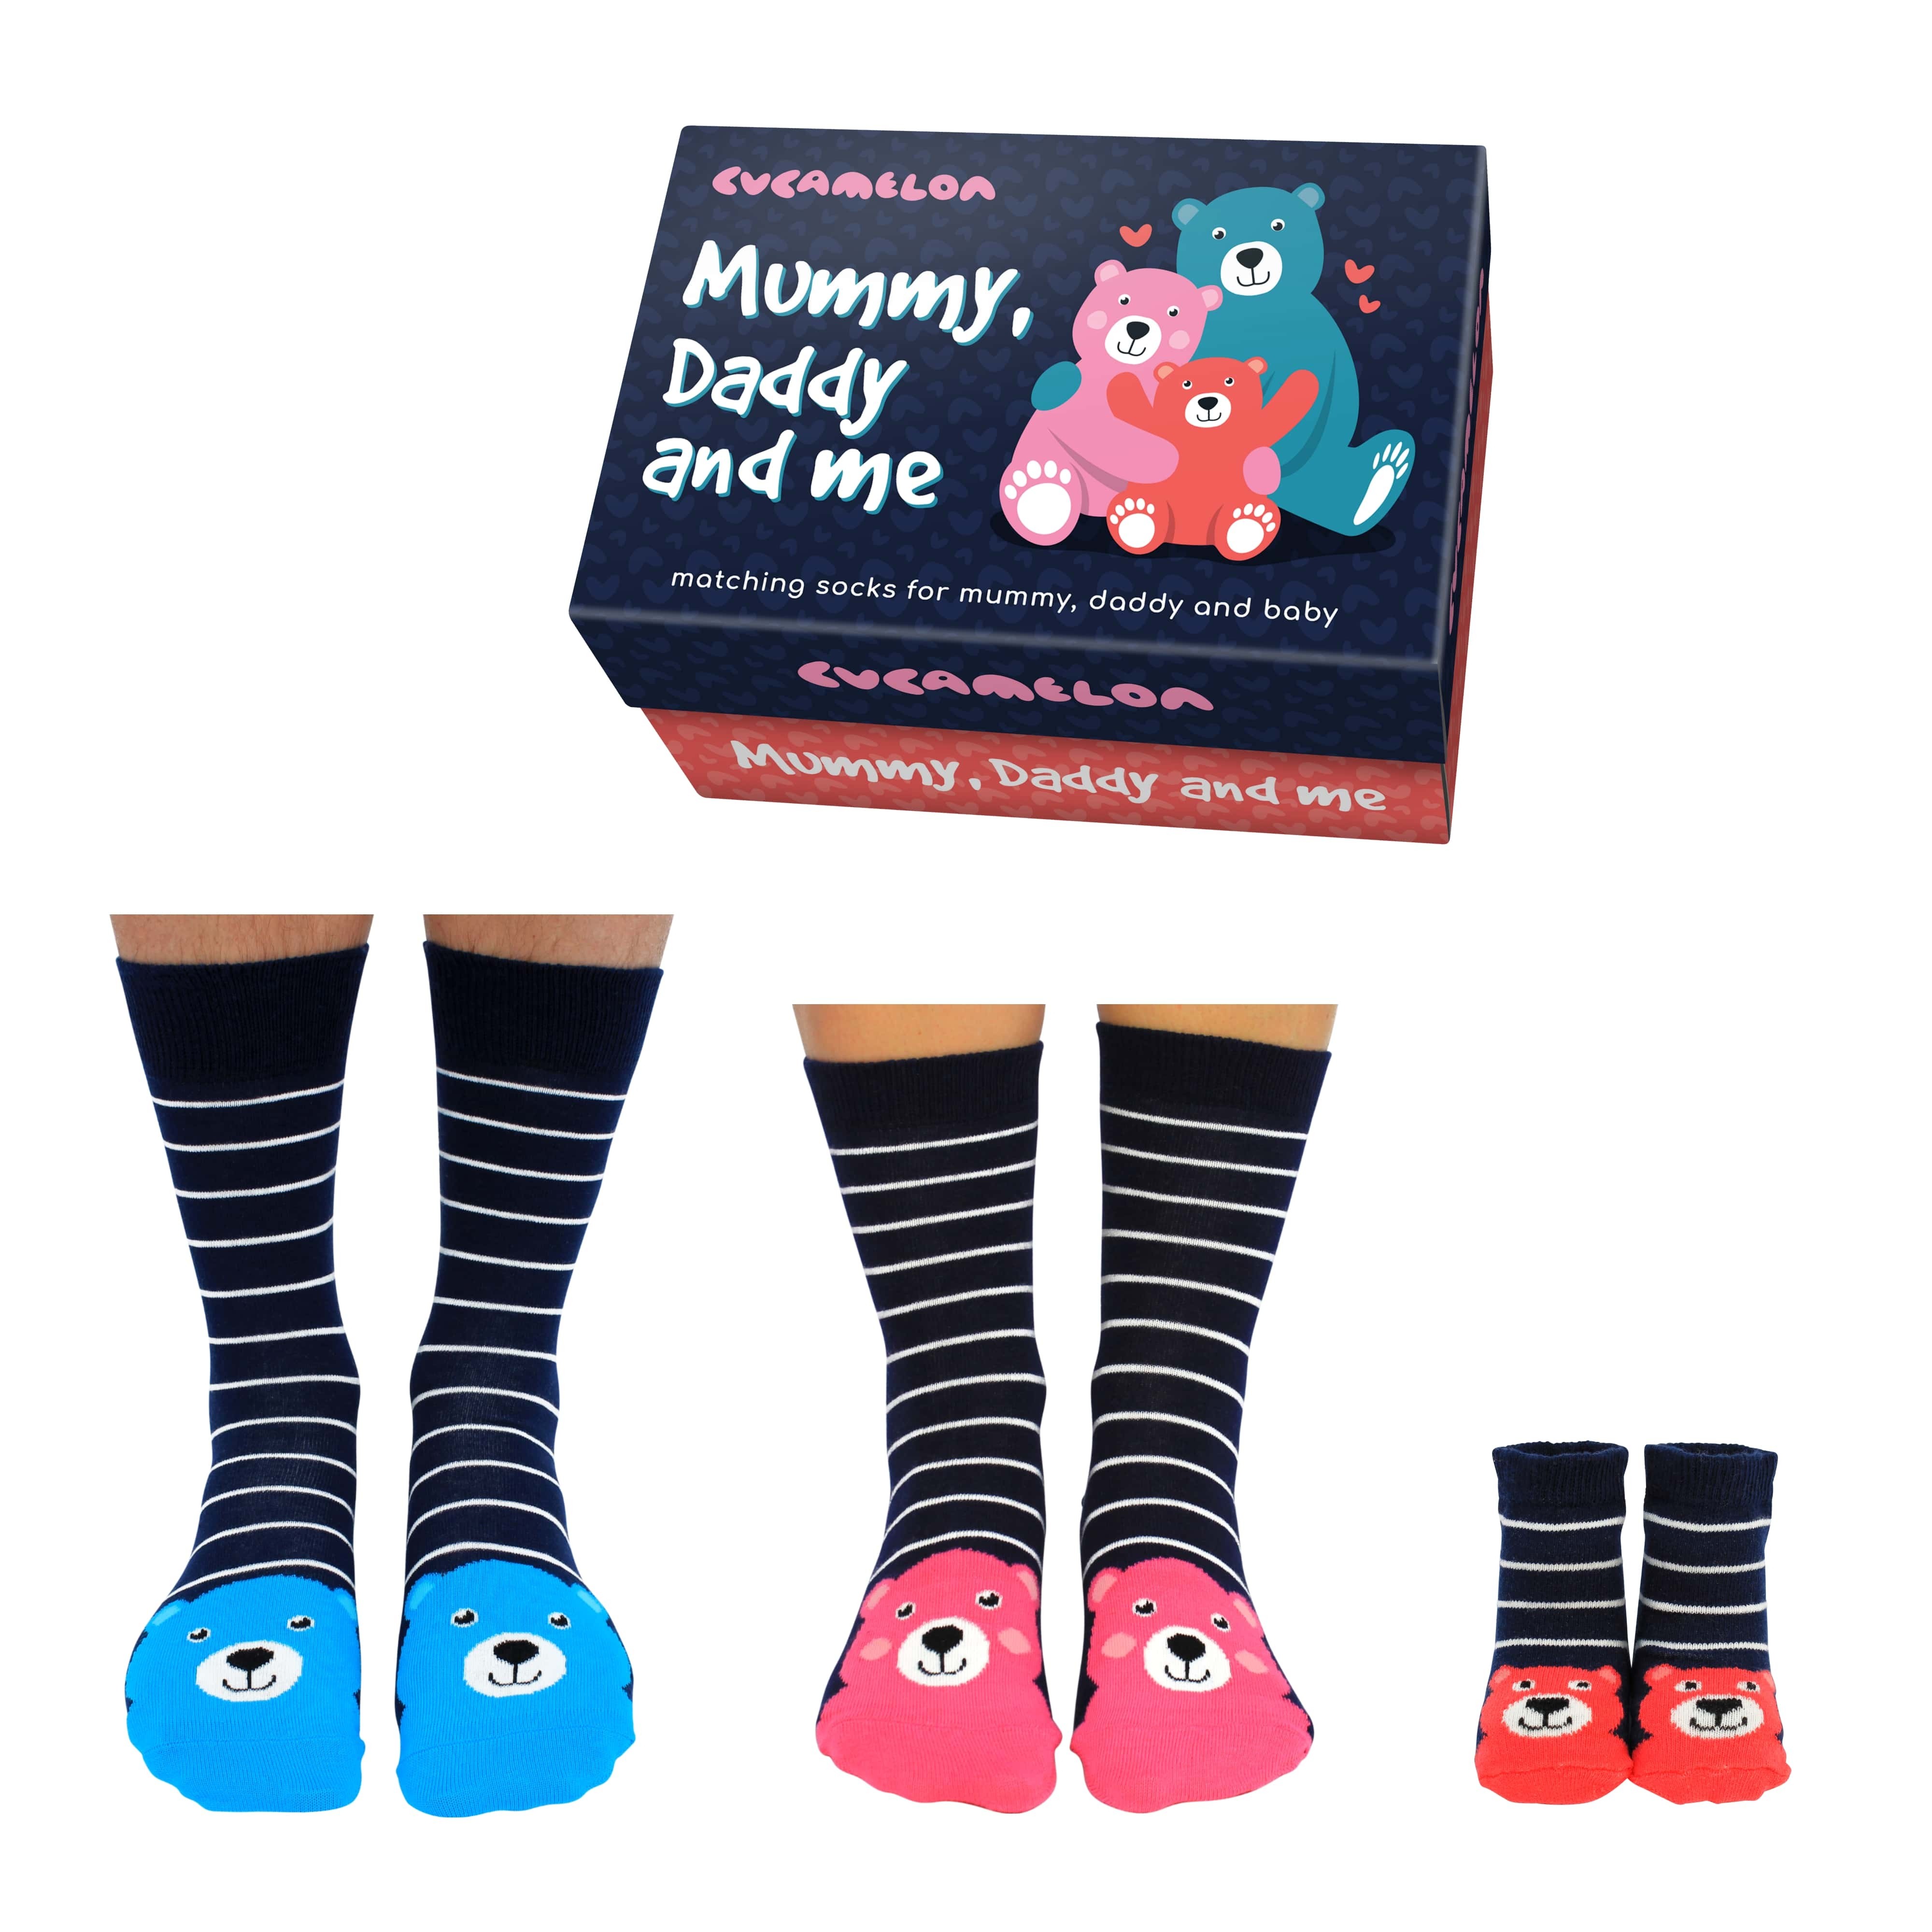 Mummy Daddy and Me socks by Cucamelon